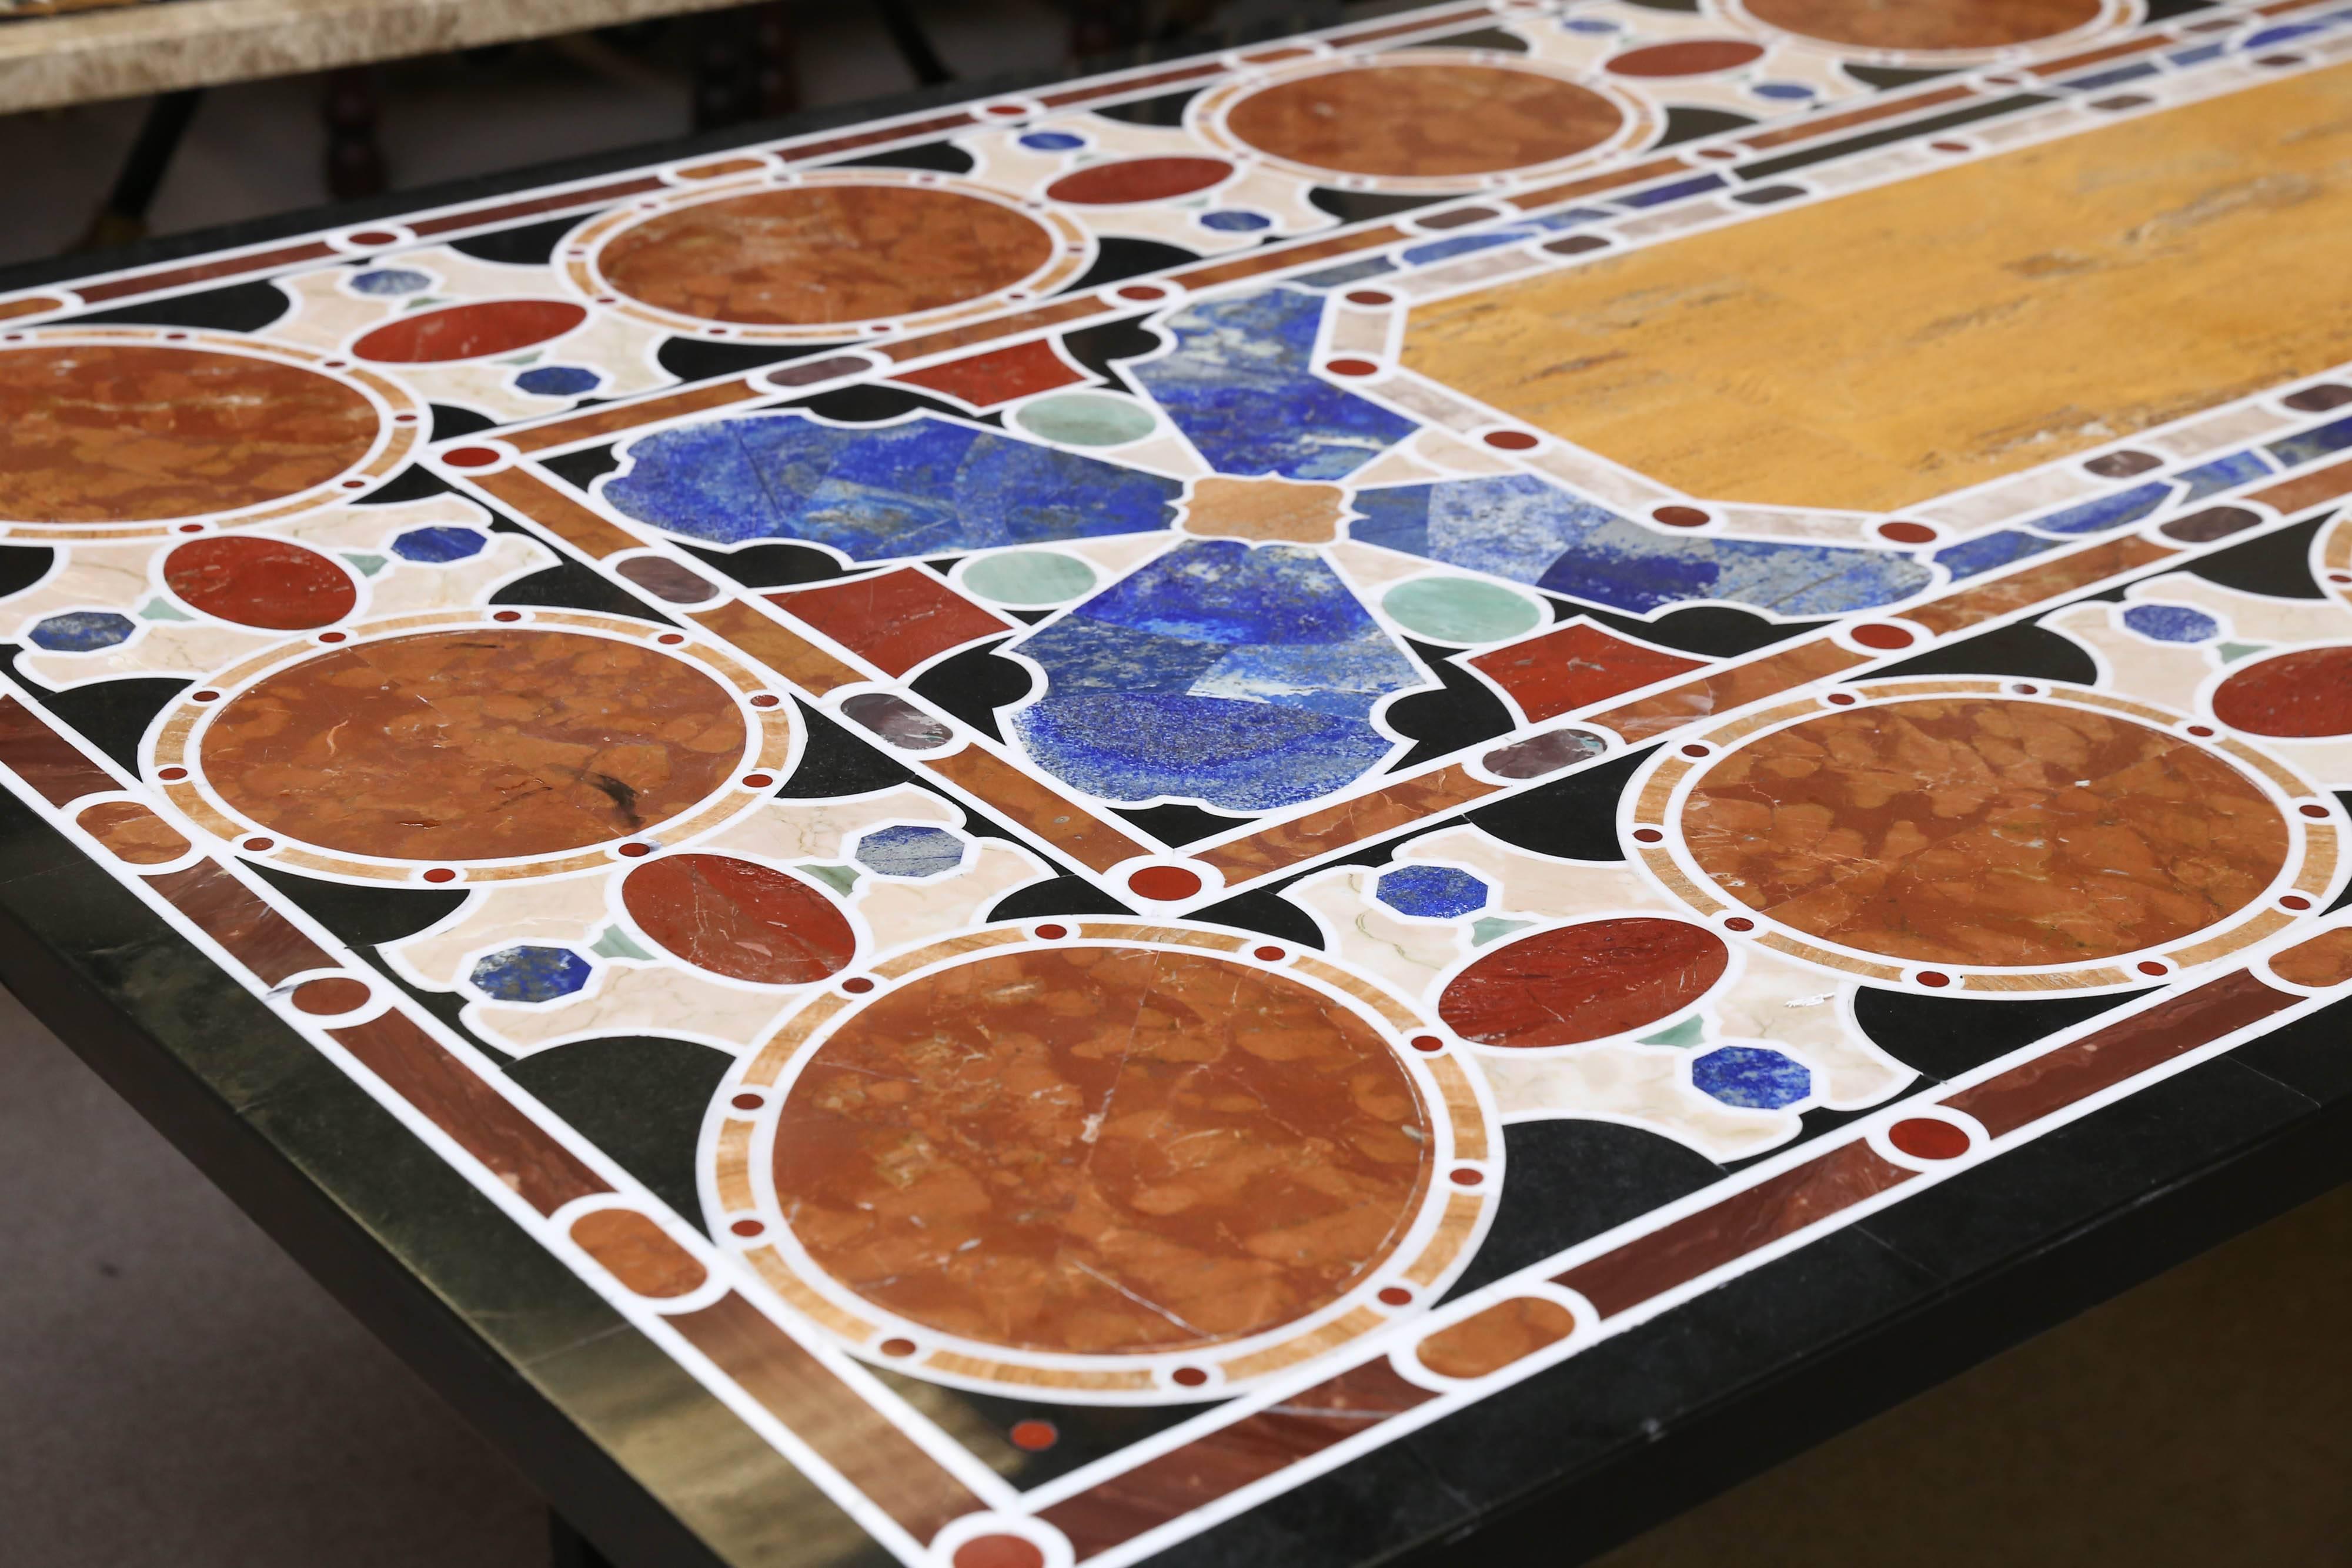 The black marble-top is inlaid with large quantity of semi-precious stones lapis-lazuli and other rare stones. The surface is almost scratch proof. Hand-forged heavy wrought iron frame support the tabletop.